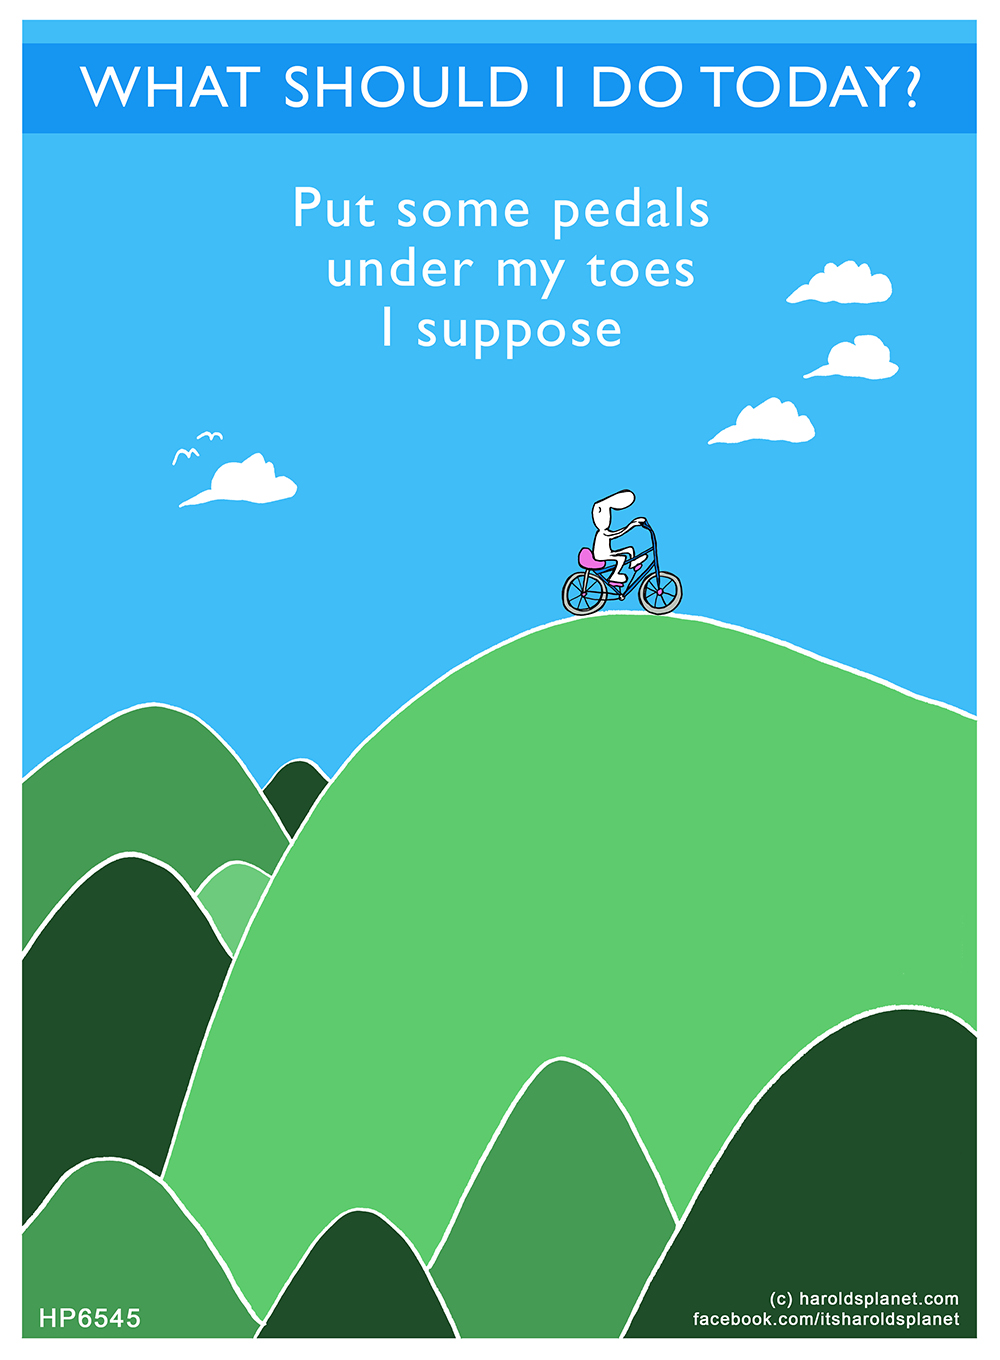 Harold's Planet: WHAT SHOULD I DO TODAY? Put some pedals under my toes, I suppose
